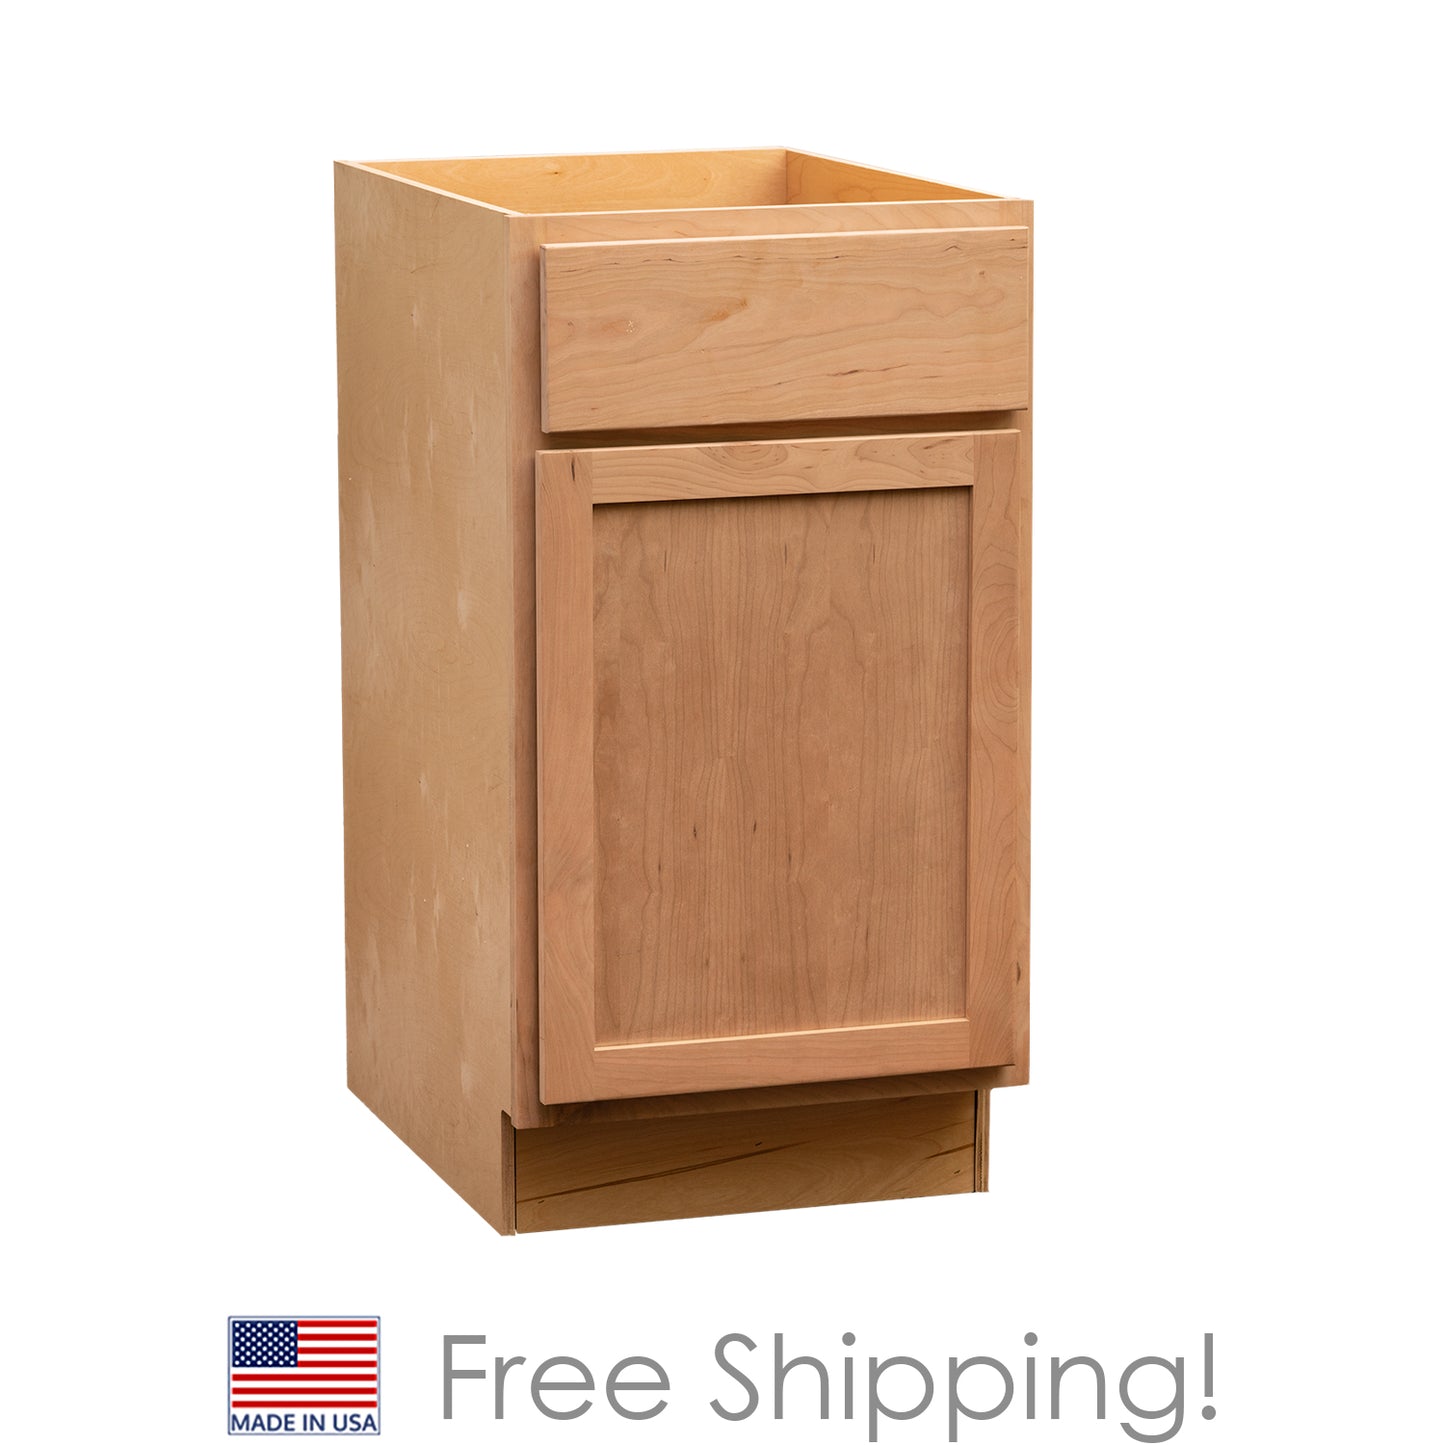 Quicklock RTA (Ready-to-Assemble) Raw Cherry Base Cabinet- 18", 21", 24" Width